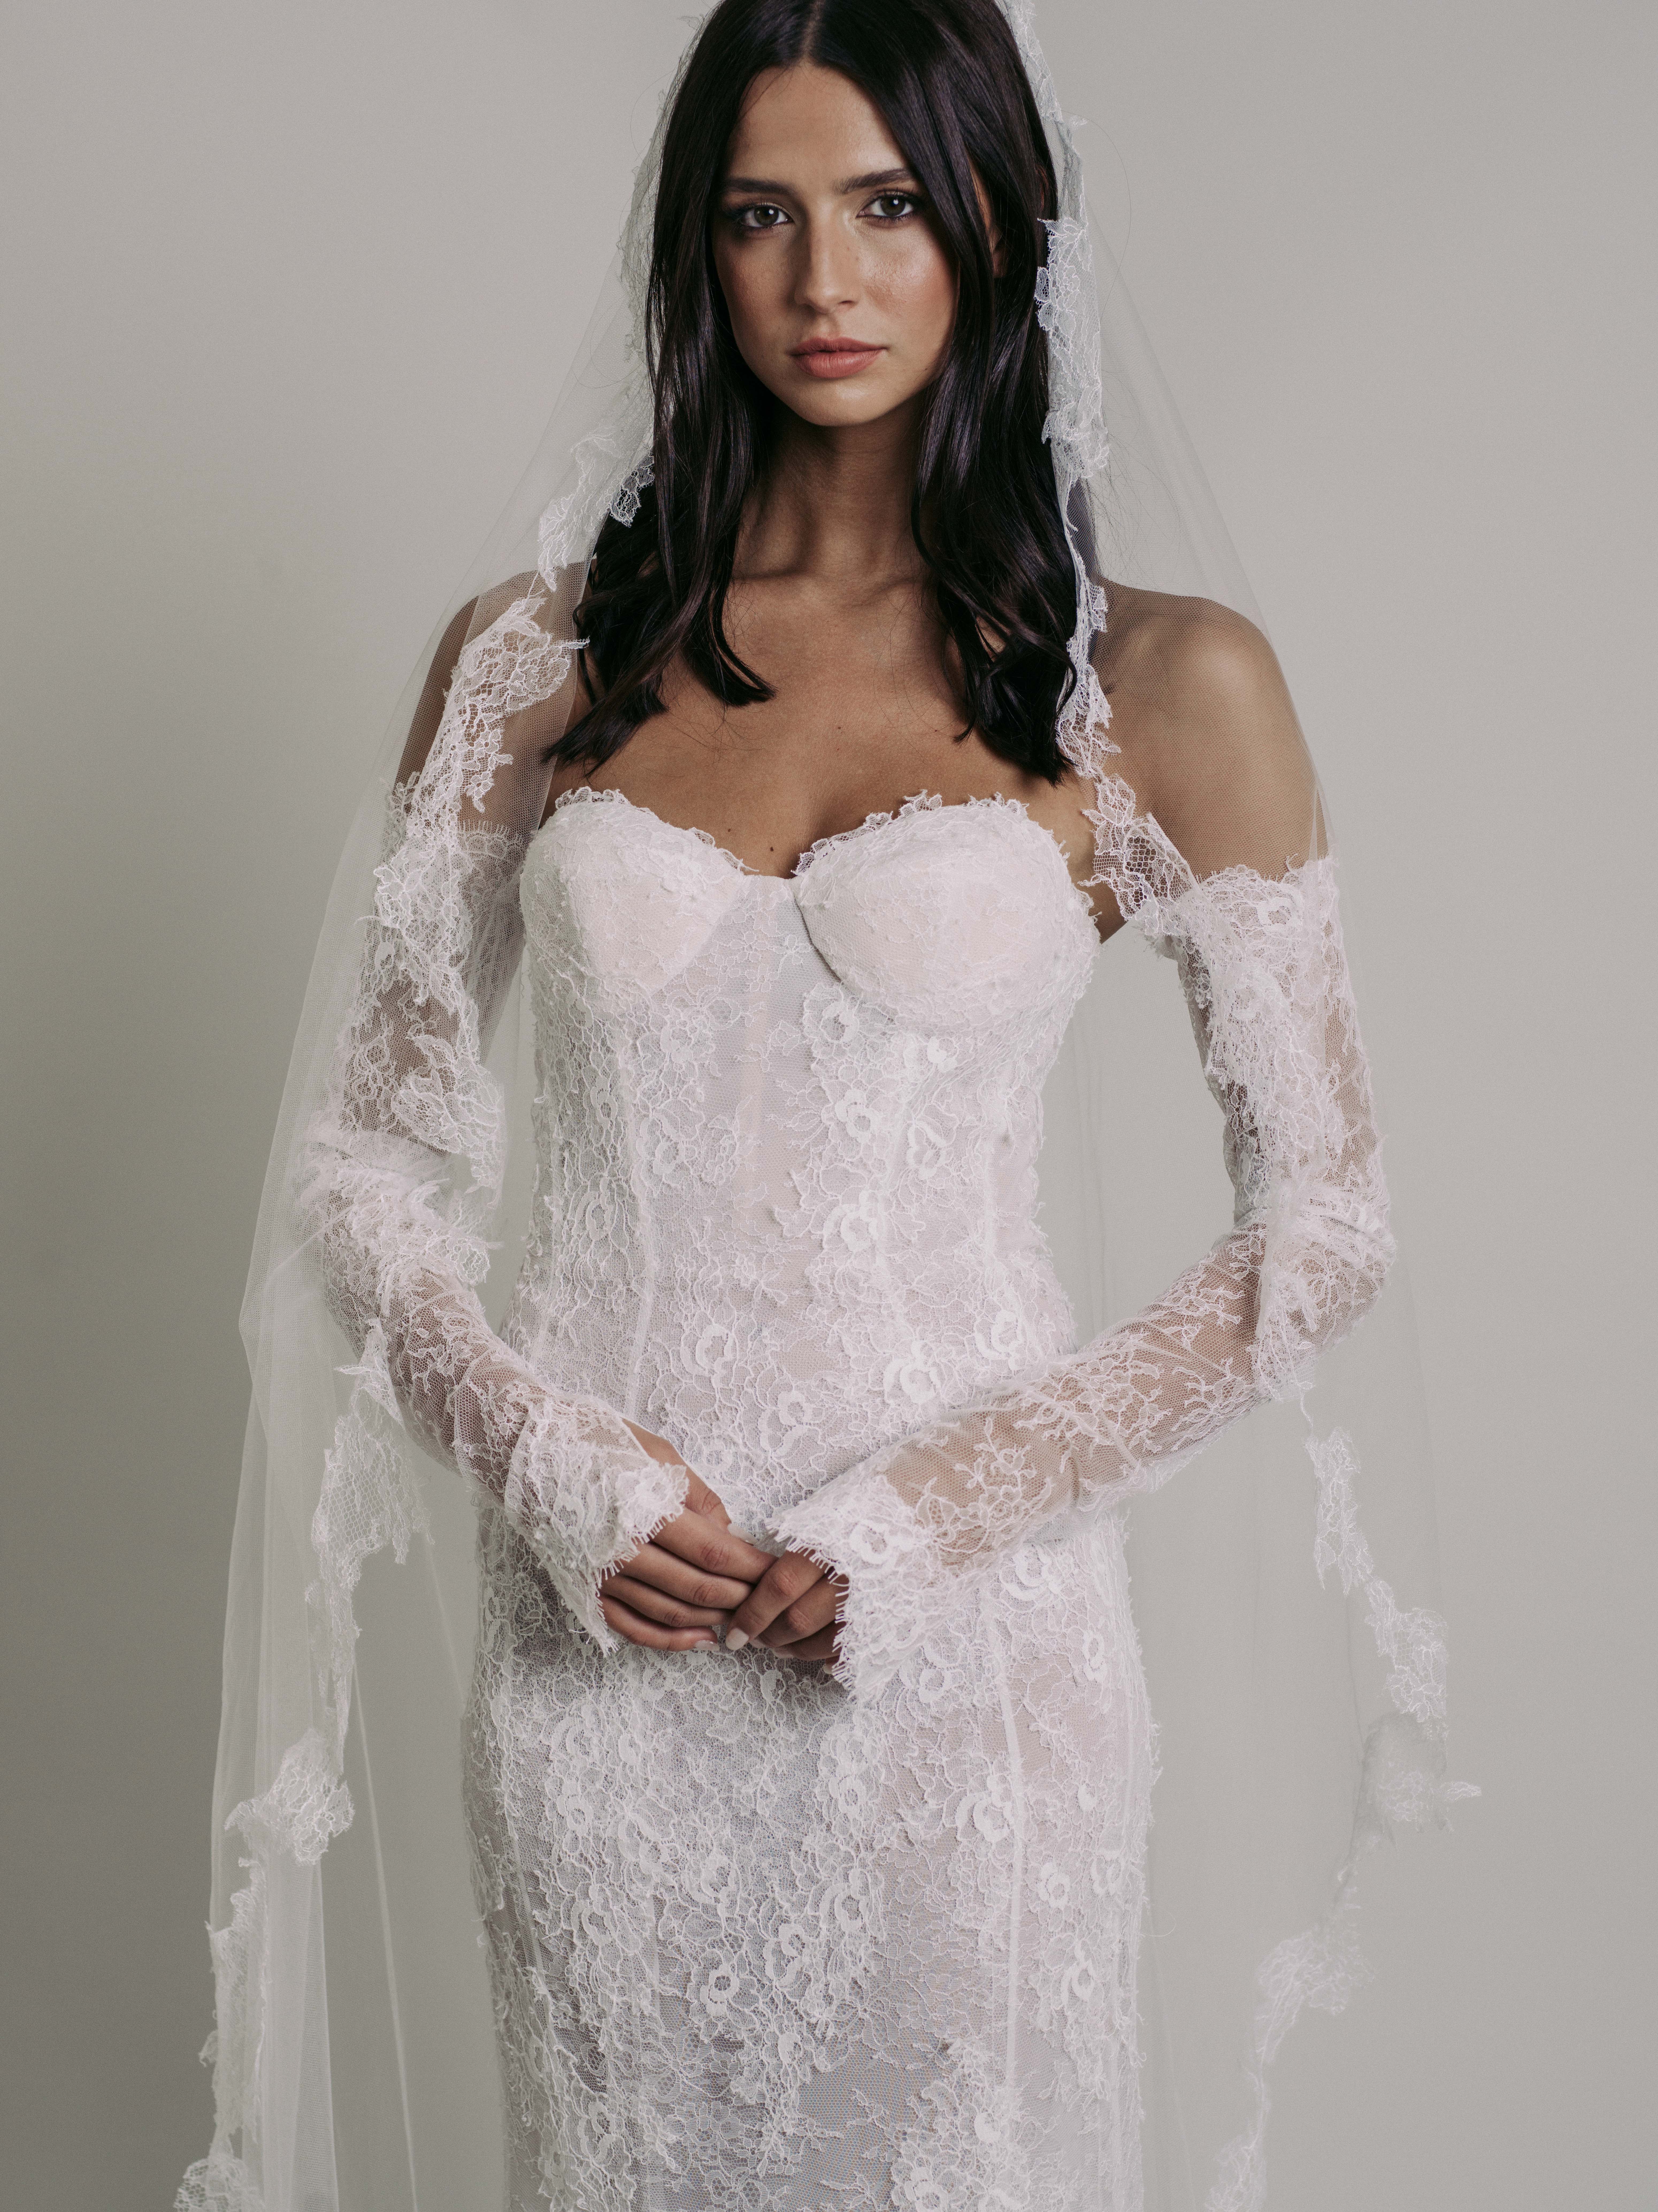 x Wedding Dress Wedding dress designer Wedding gown Wedding party look Wedding after party dress Bridal  Gowns  second look Bridal jumpsuits  Bridal dresses  Bridal second looks Wedding second looks